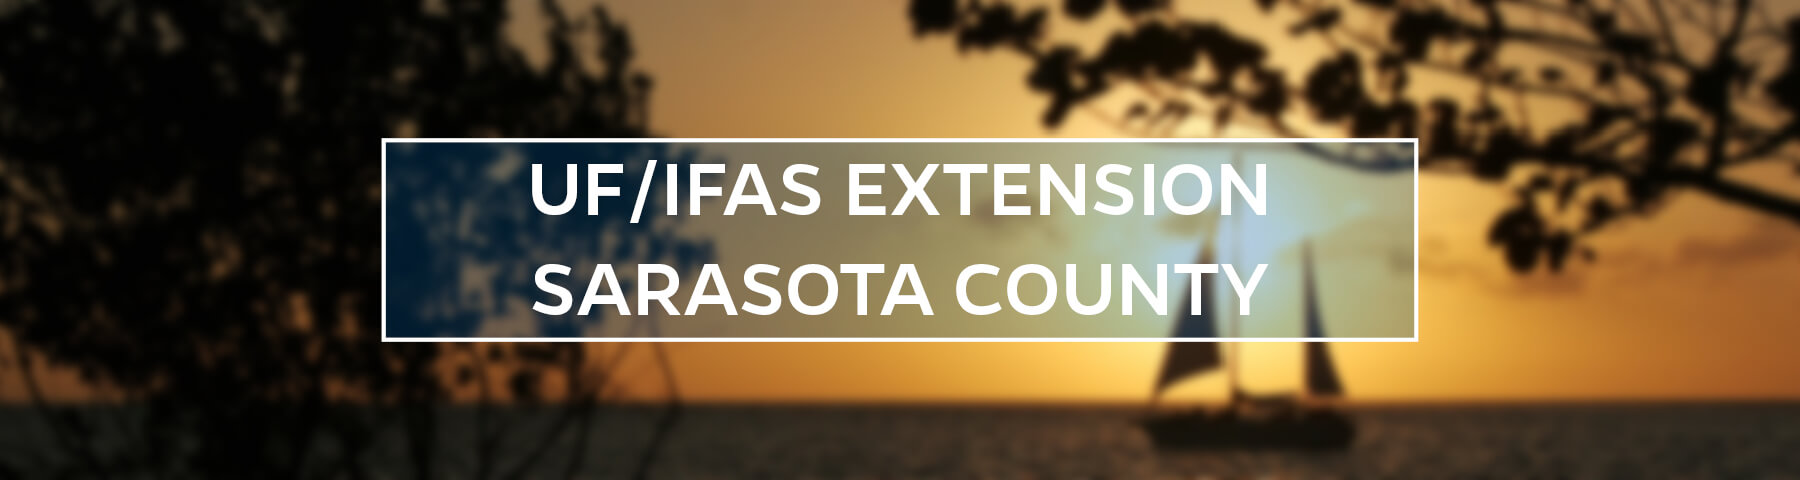 UF/IFAS Extension Sarasota County